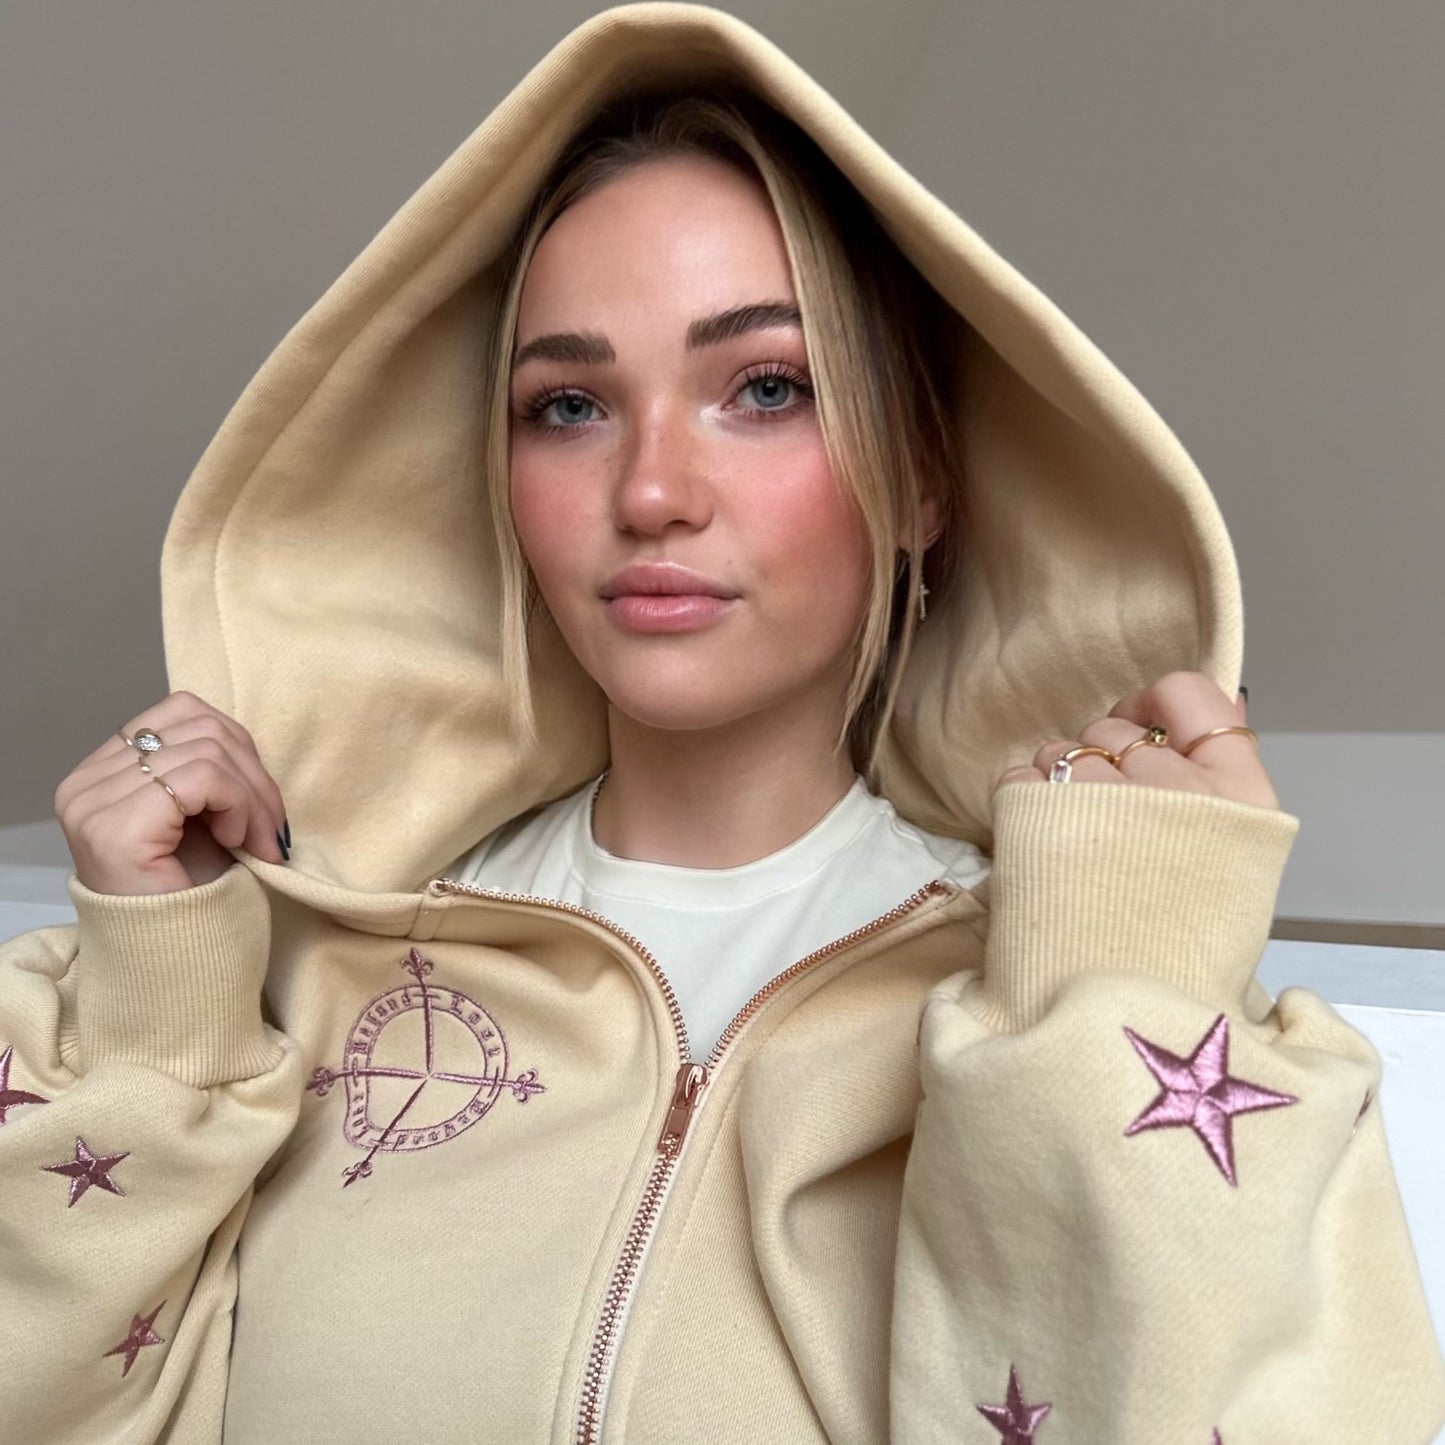 Champagne Gold Zip Up Hoodie: Rose Gold Metallic Embroidery